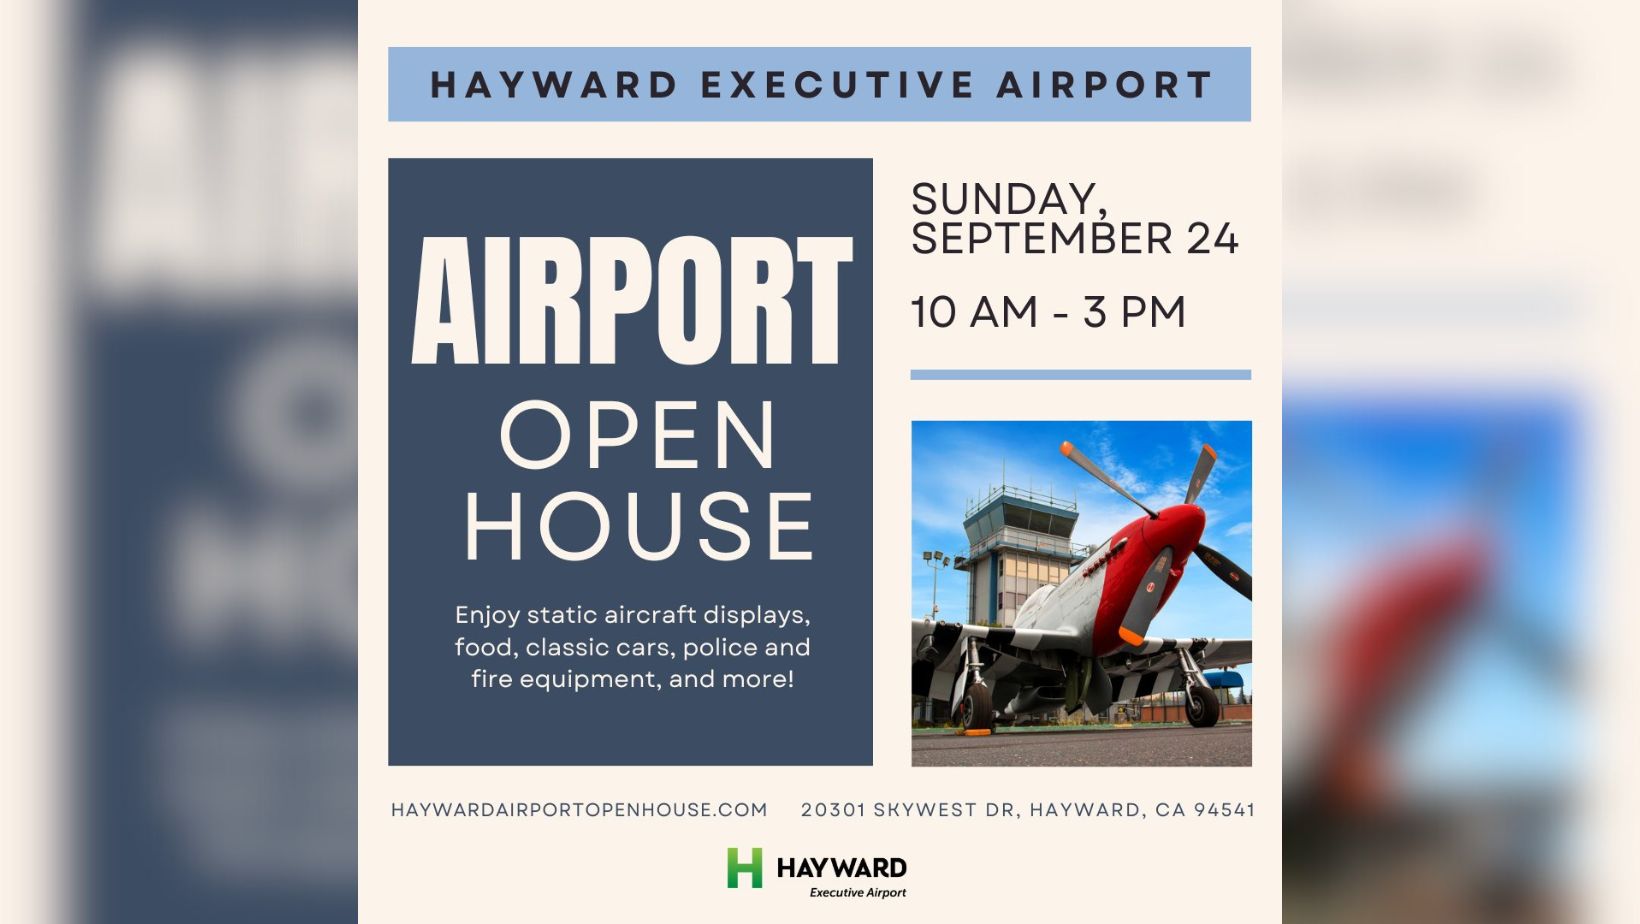 Soar SkyHigh with Hayward Executive Airport's Exhilarating Open House